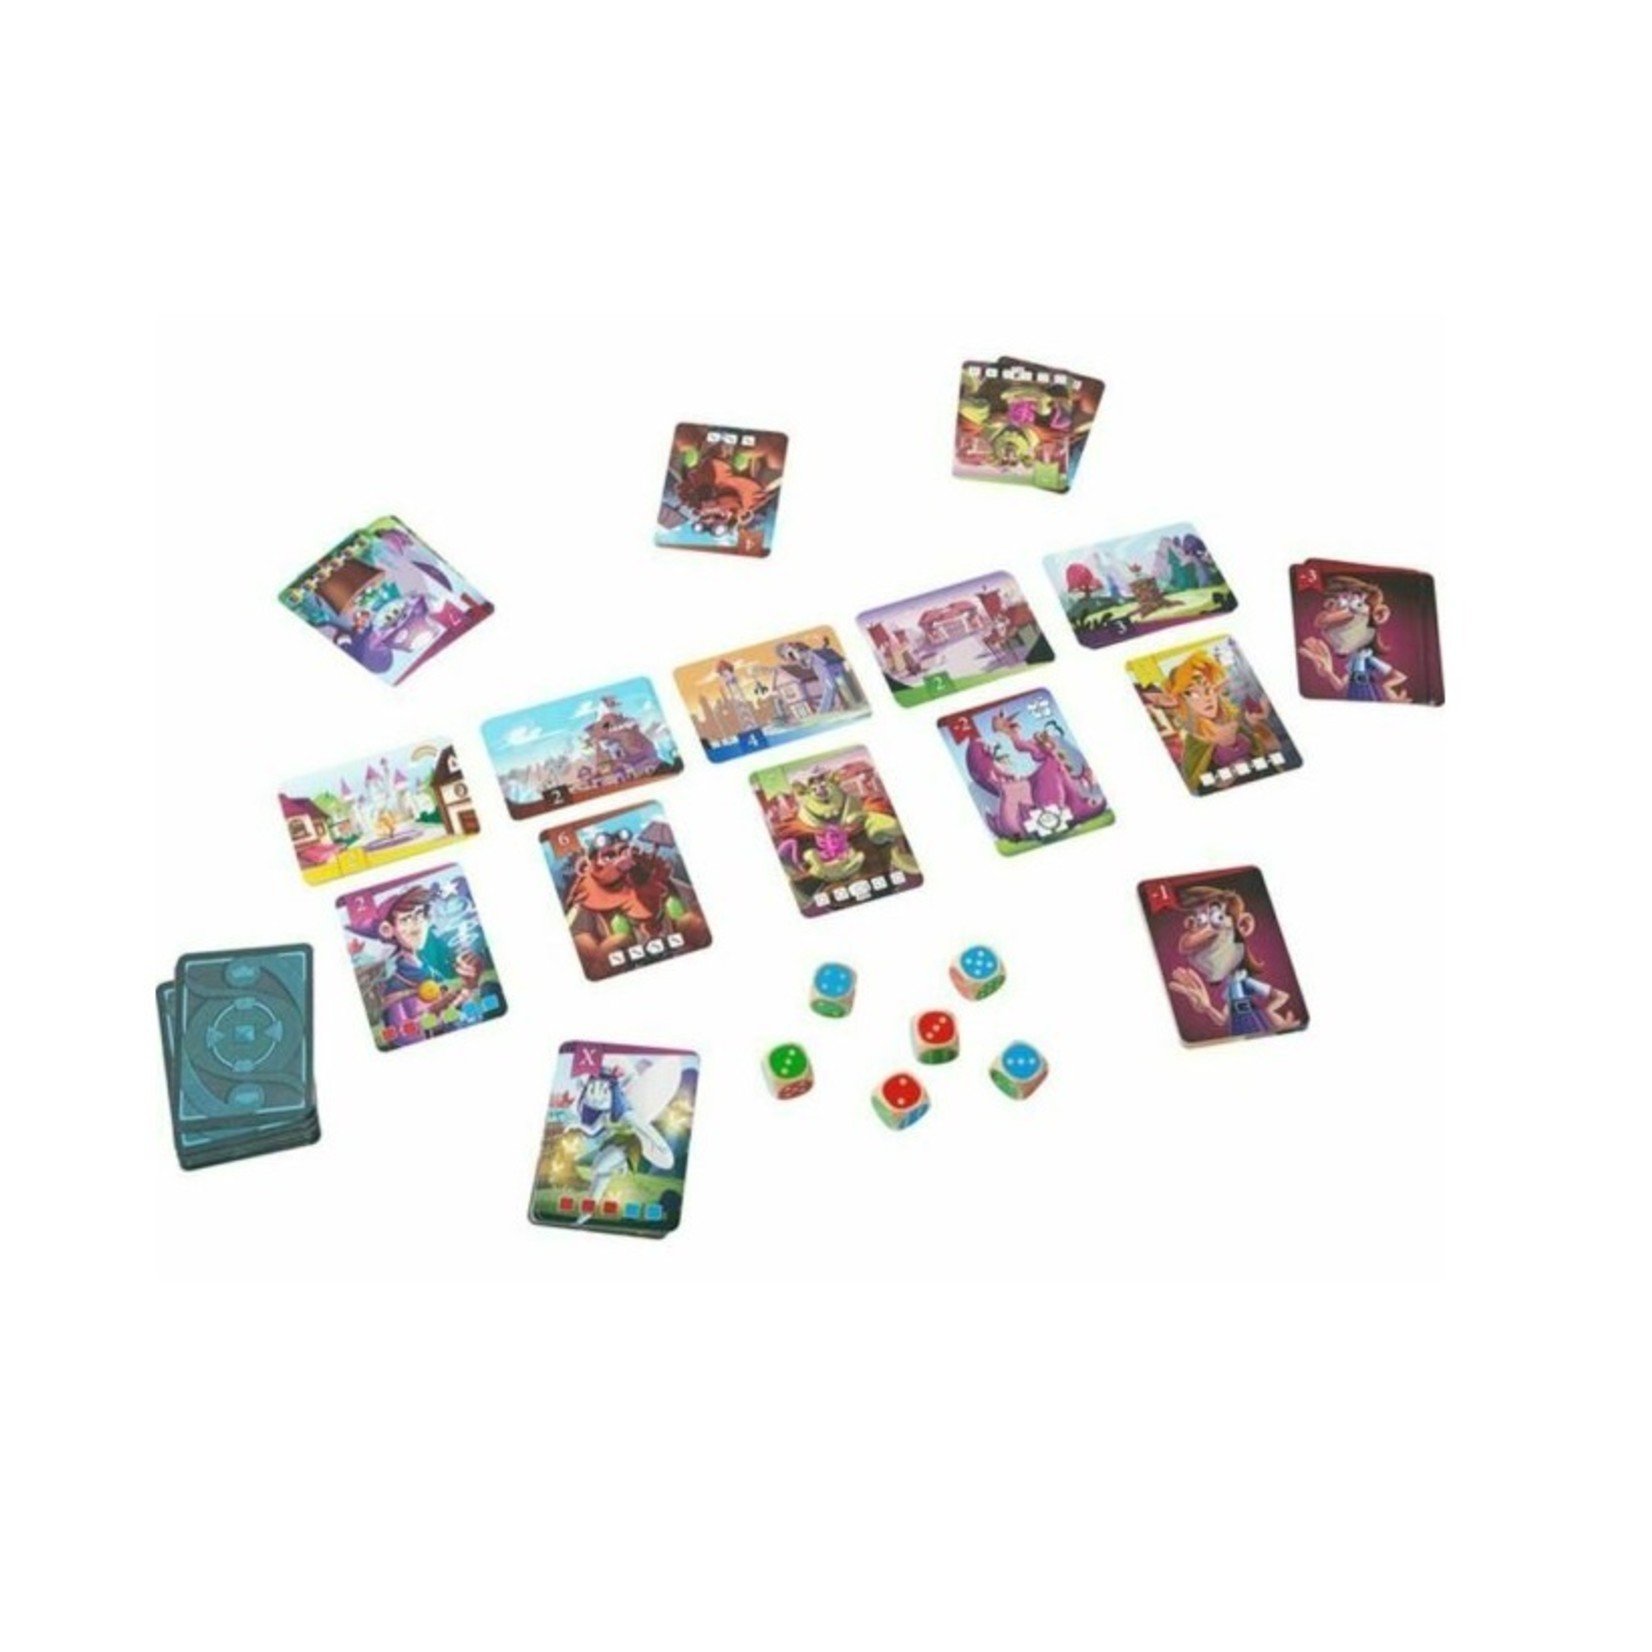 Haba King of the dice (Multilingue)